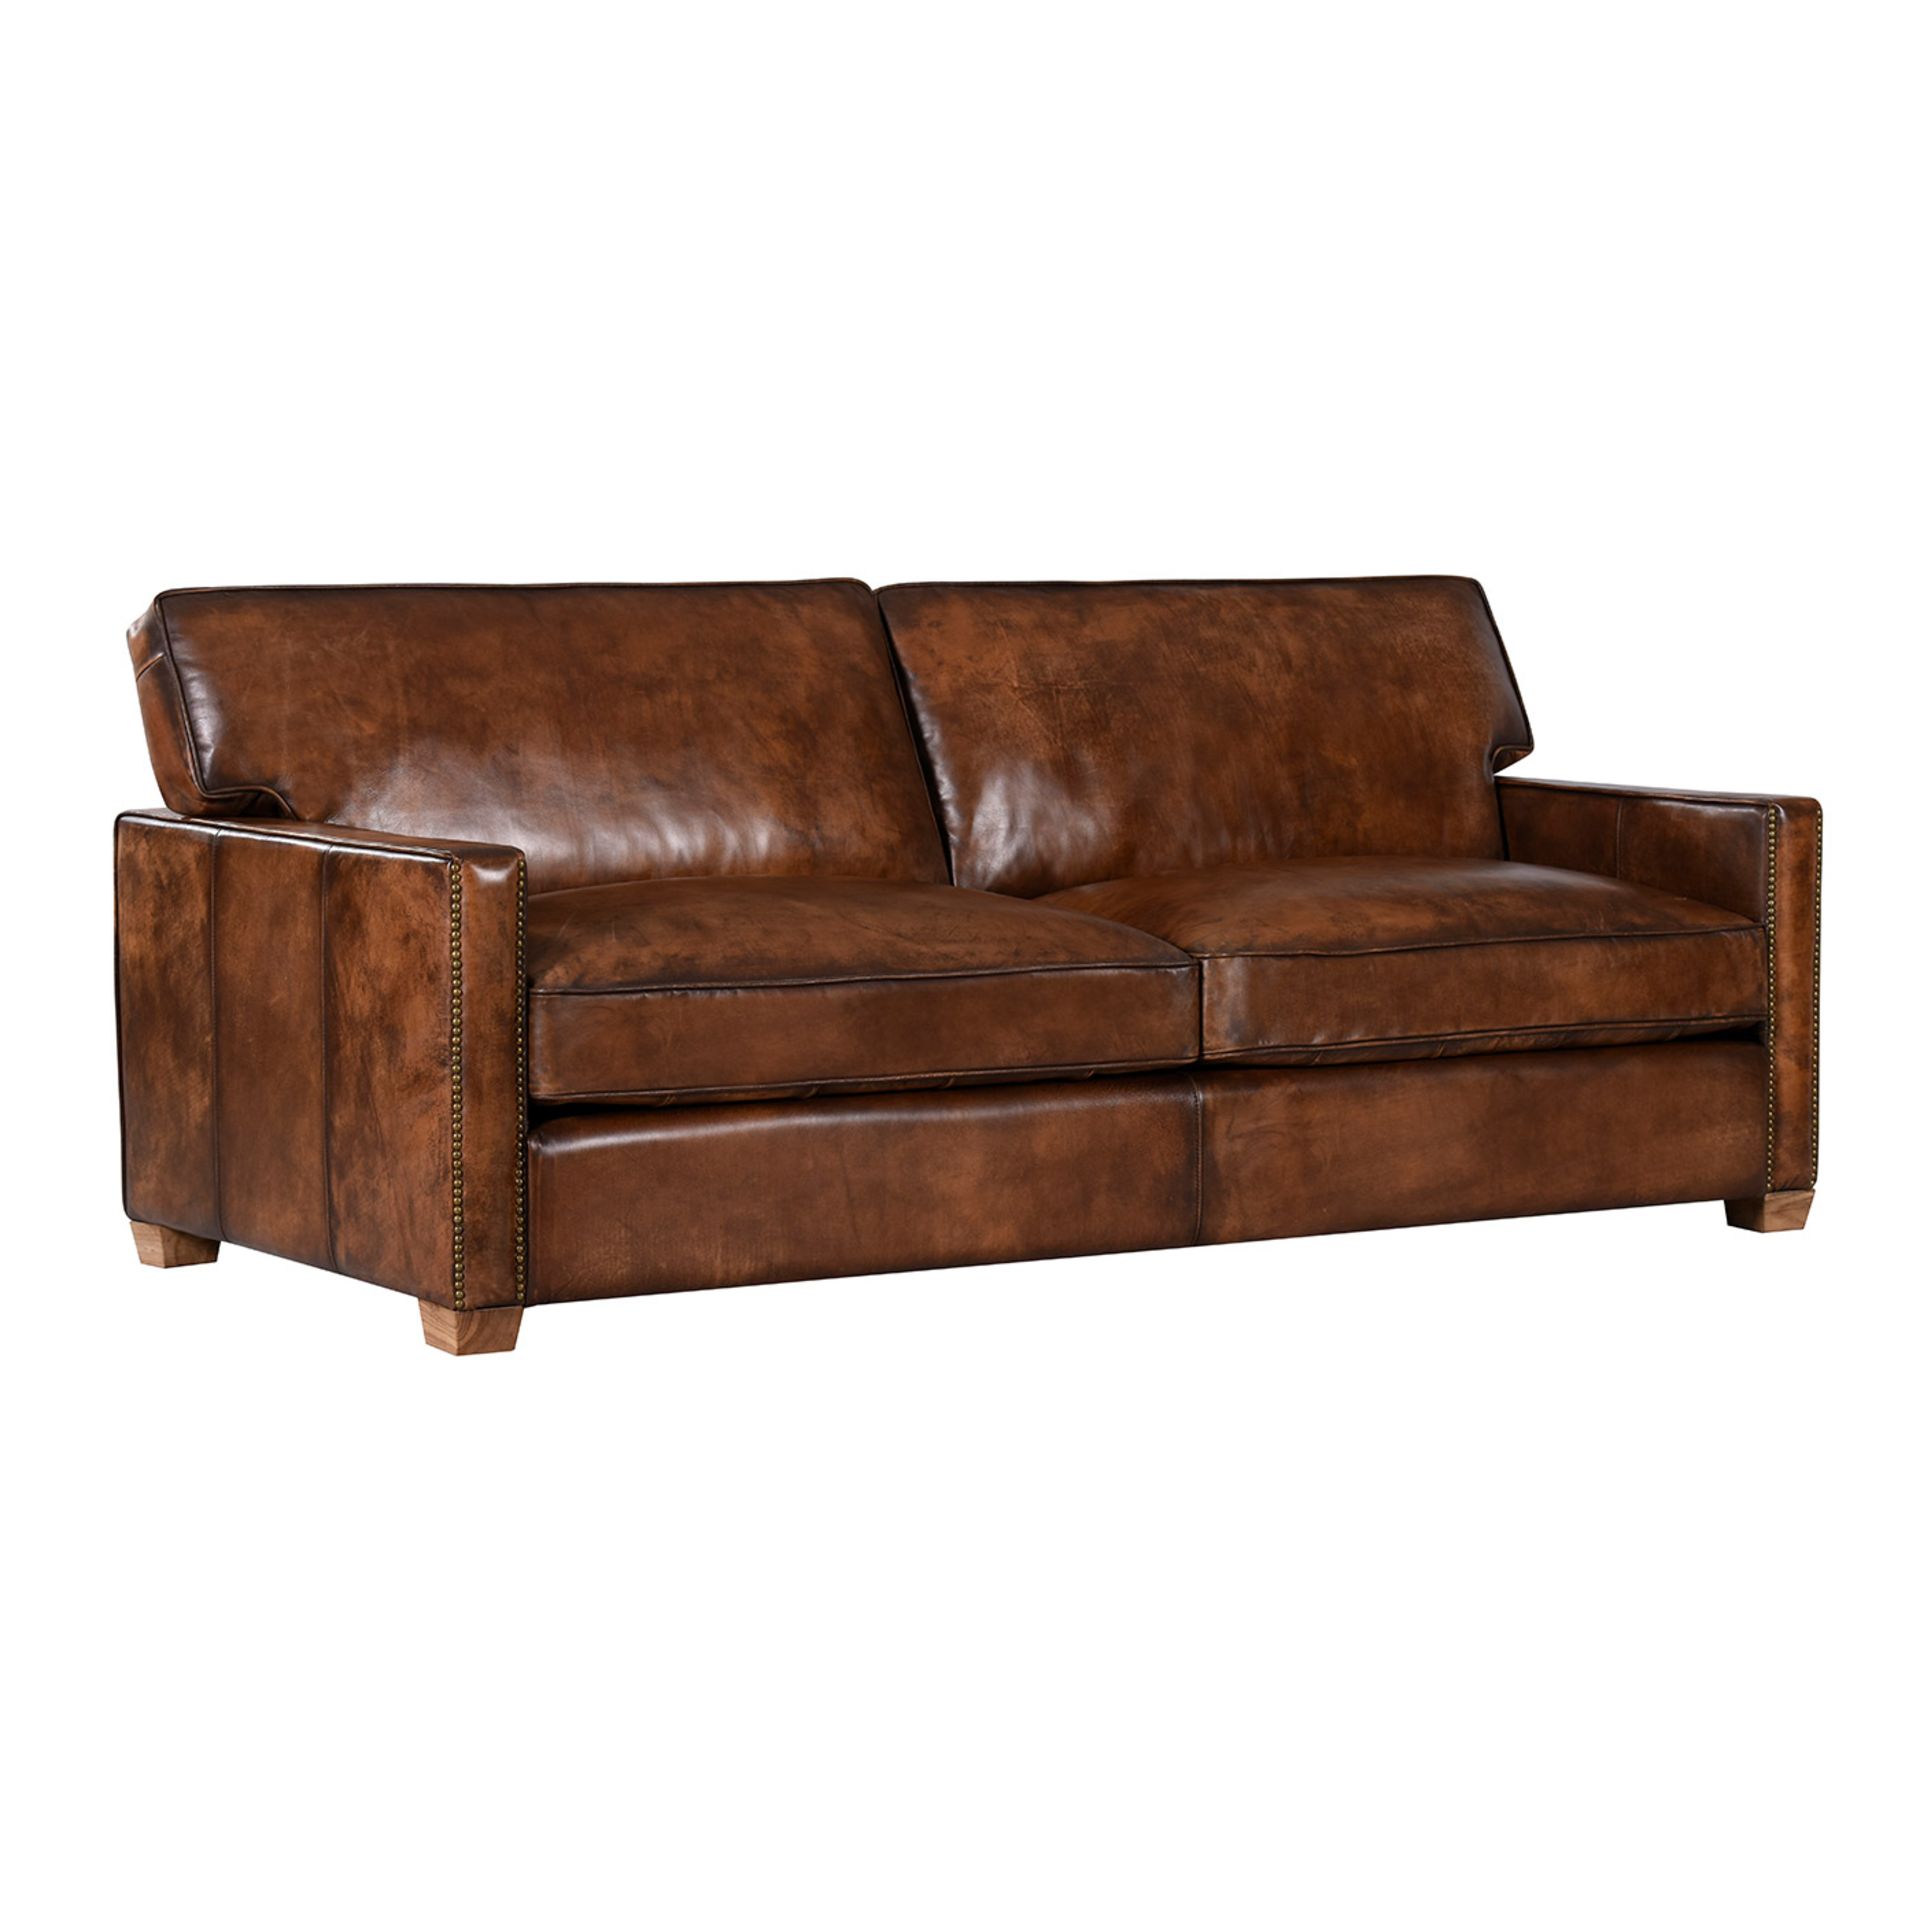 The Greaves Sofa 1 Seater Original Vintage Espresso Leather The Greaves Is A Classic Sofa With Mid- - Image 2 of 4